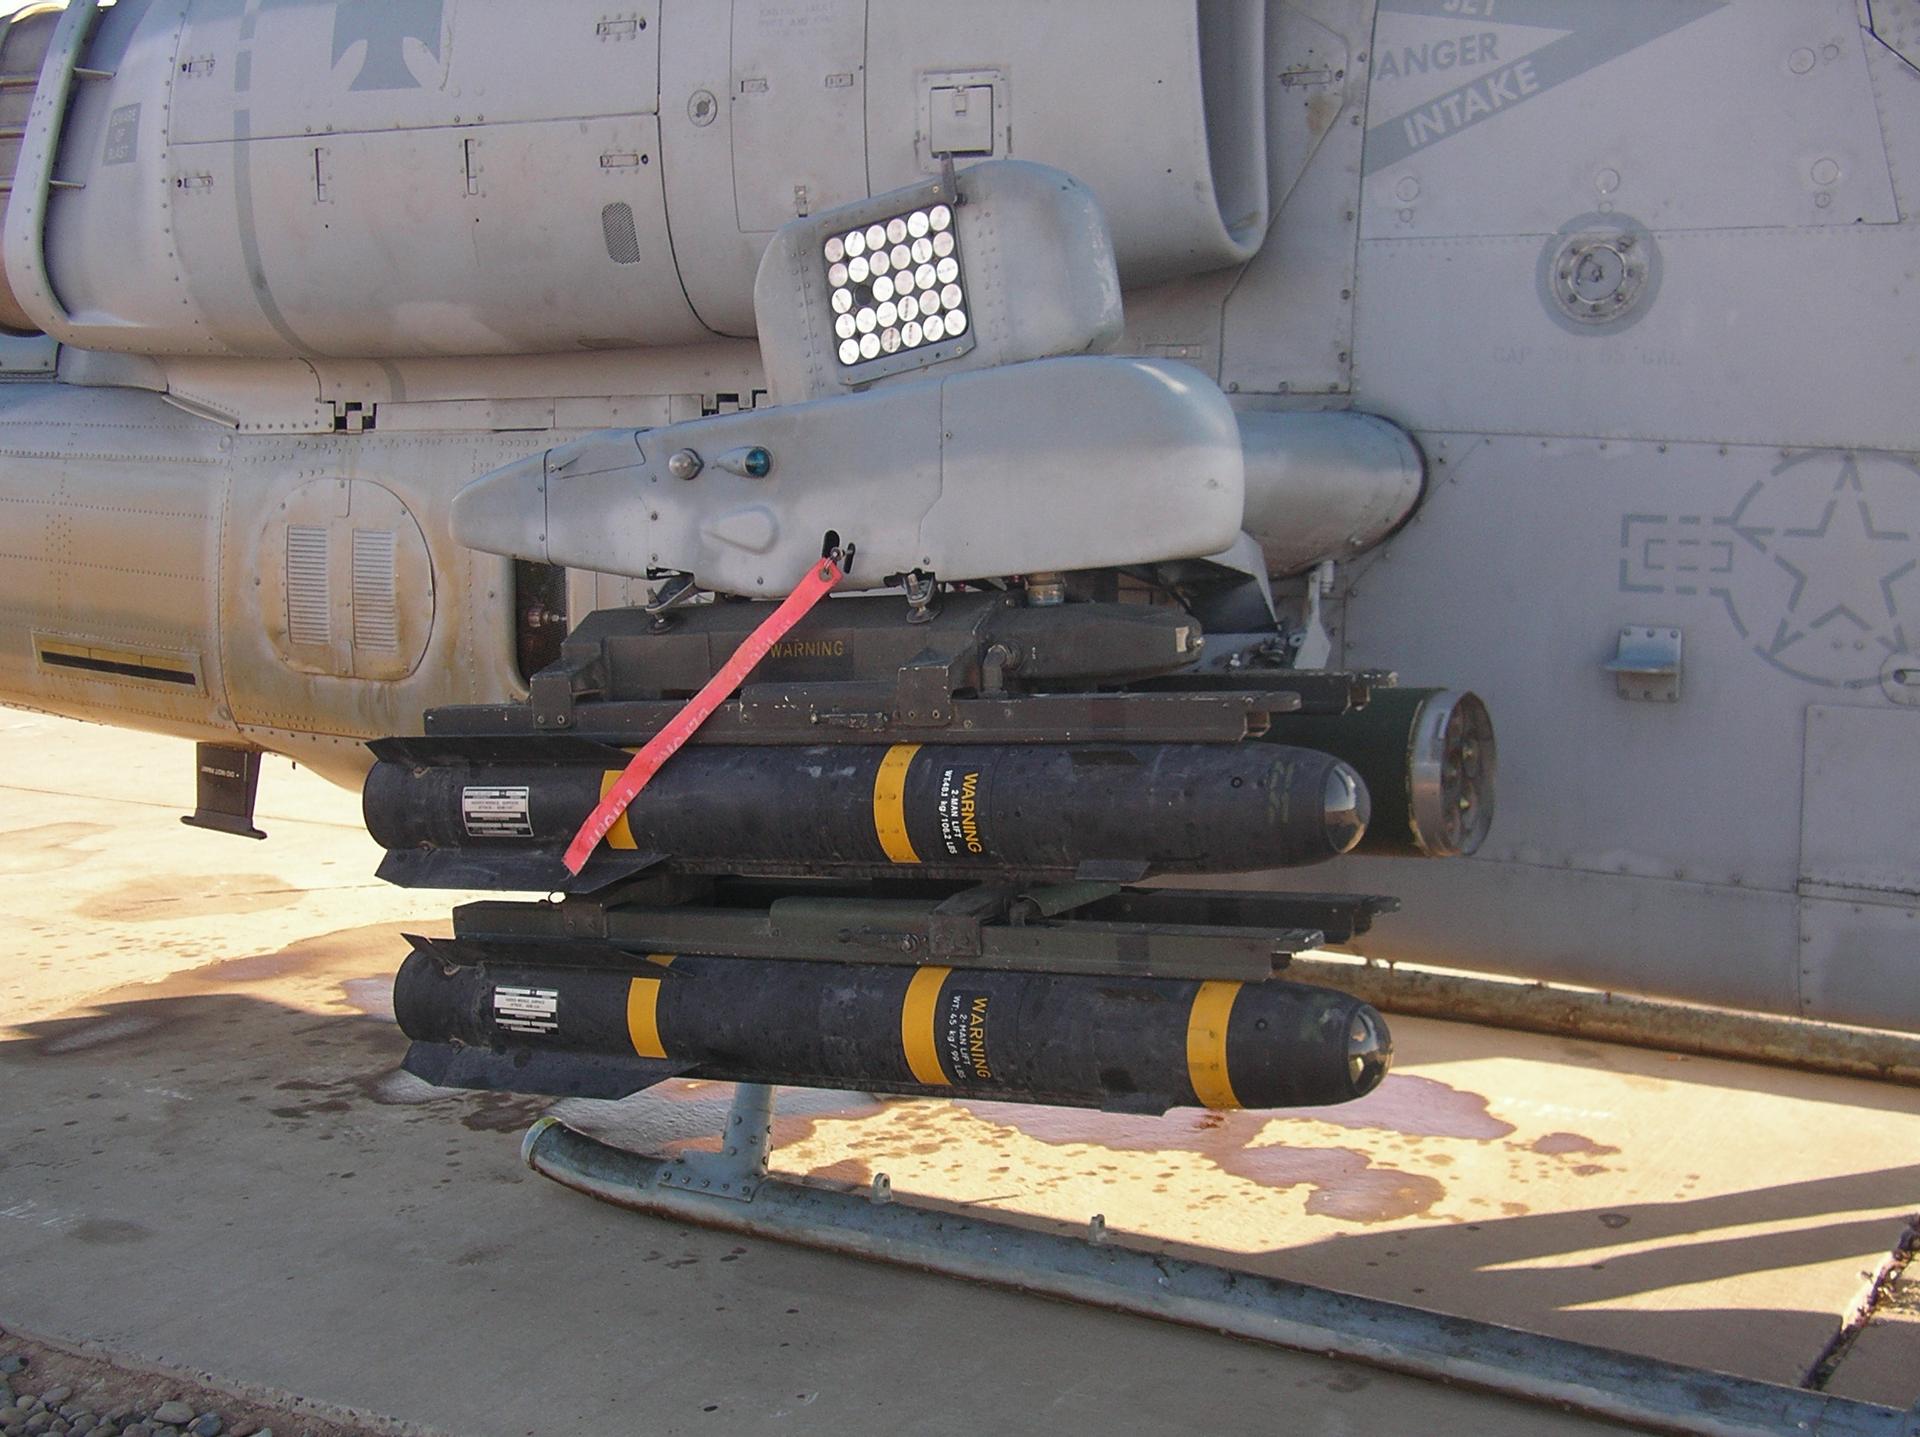 Hellfire missile loaded on a Bell AH-1 SuperCobra helicopter at Balad Air Base in Iraq in 2005.